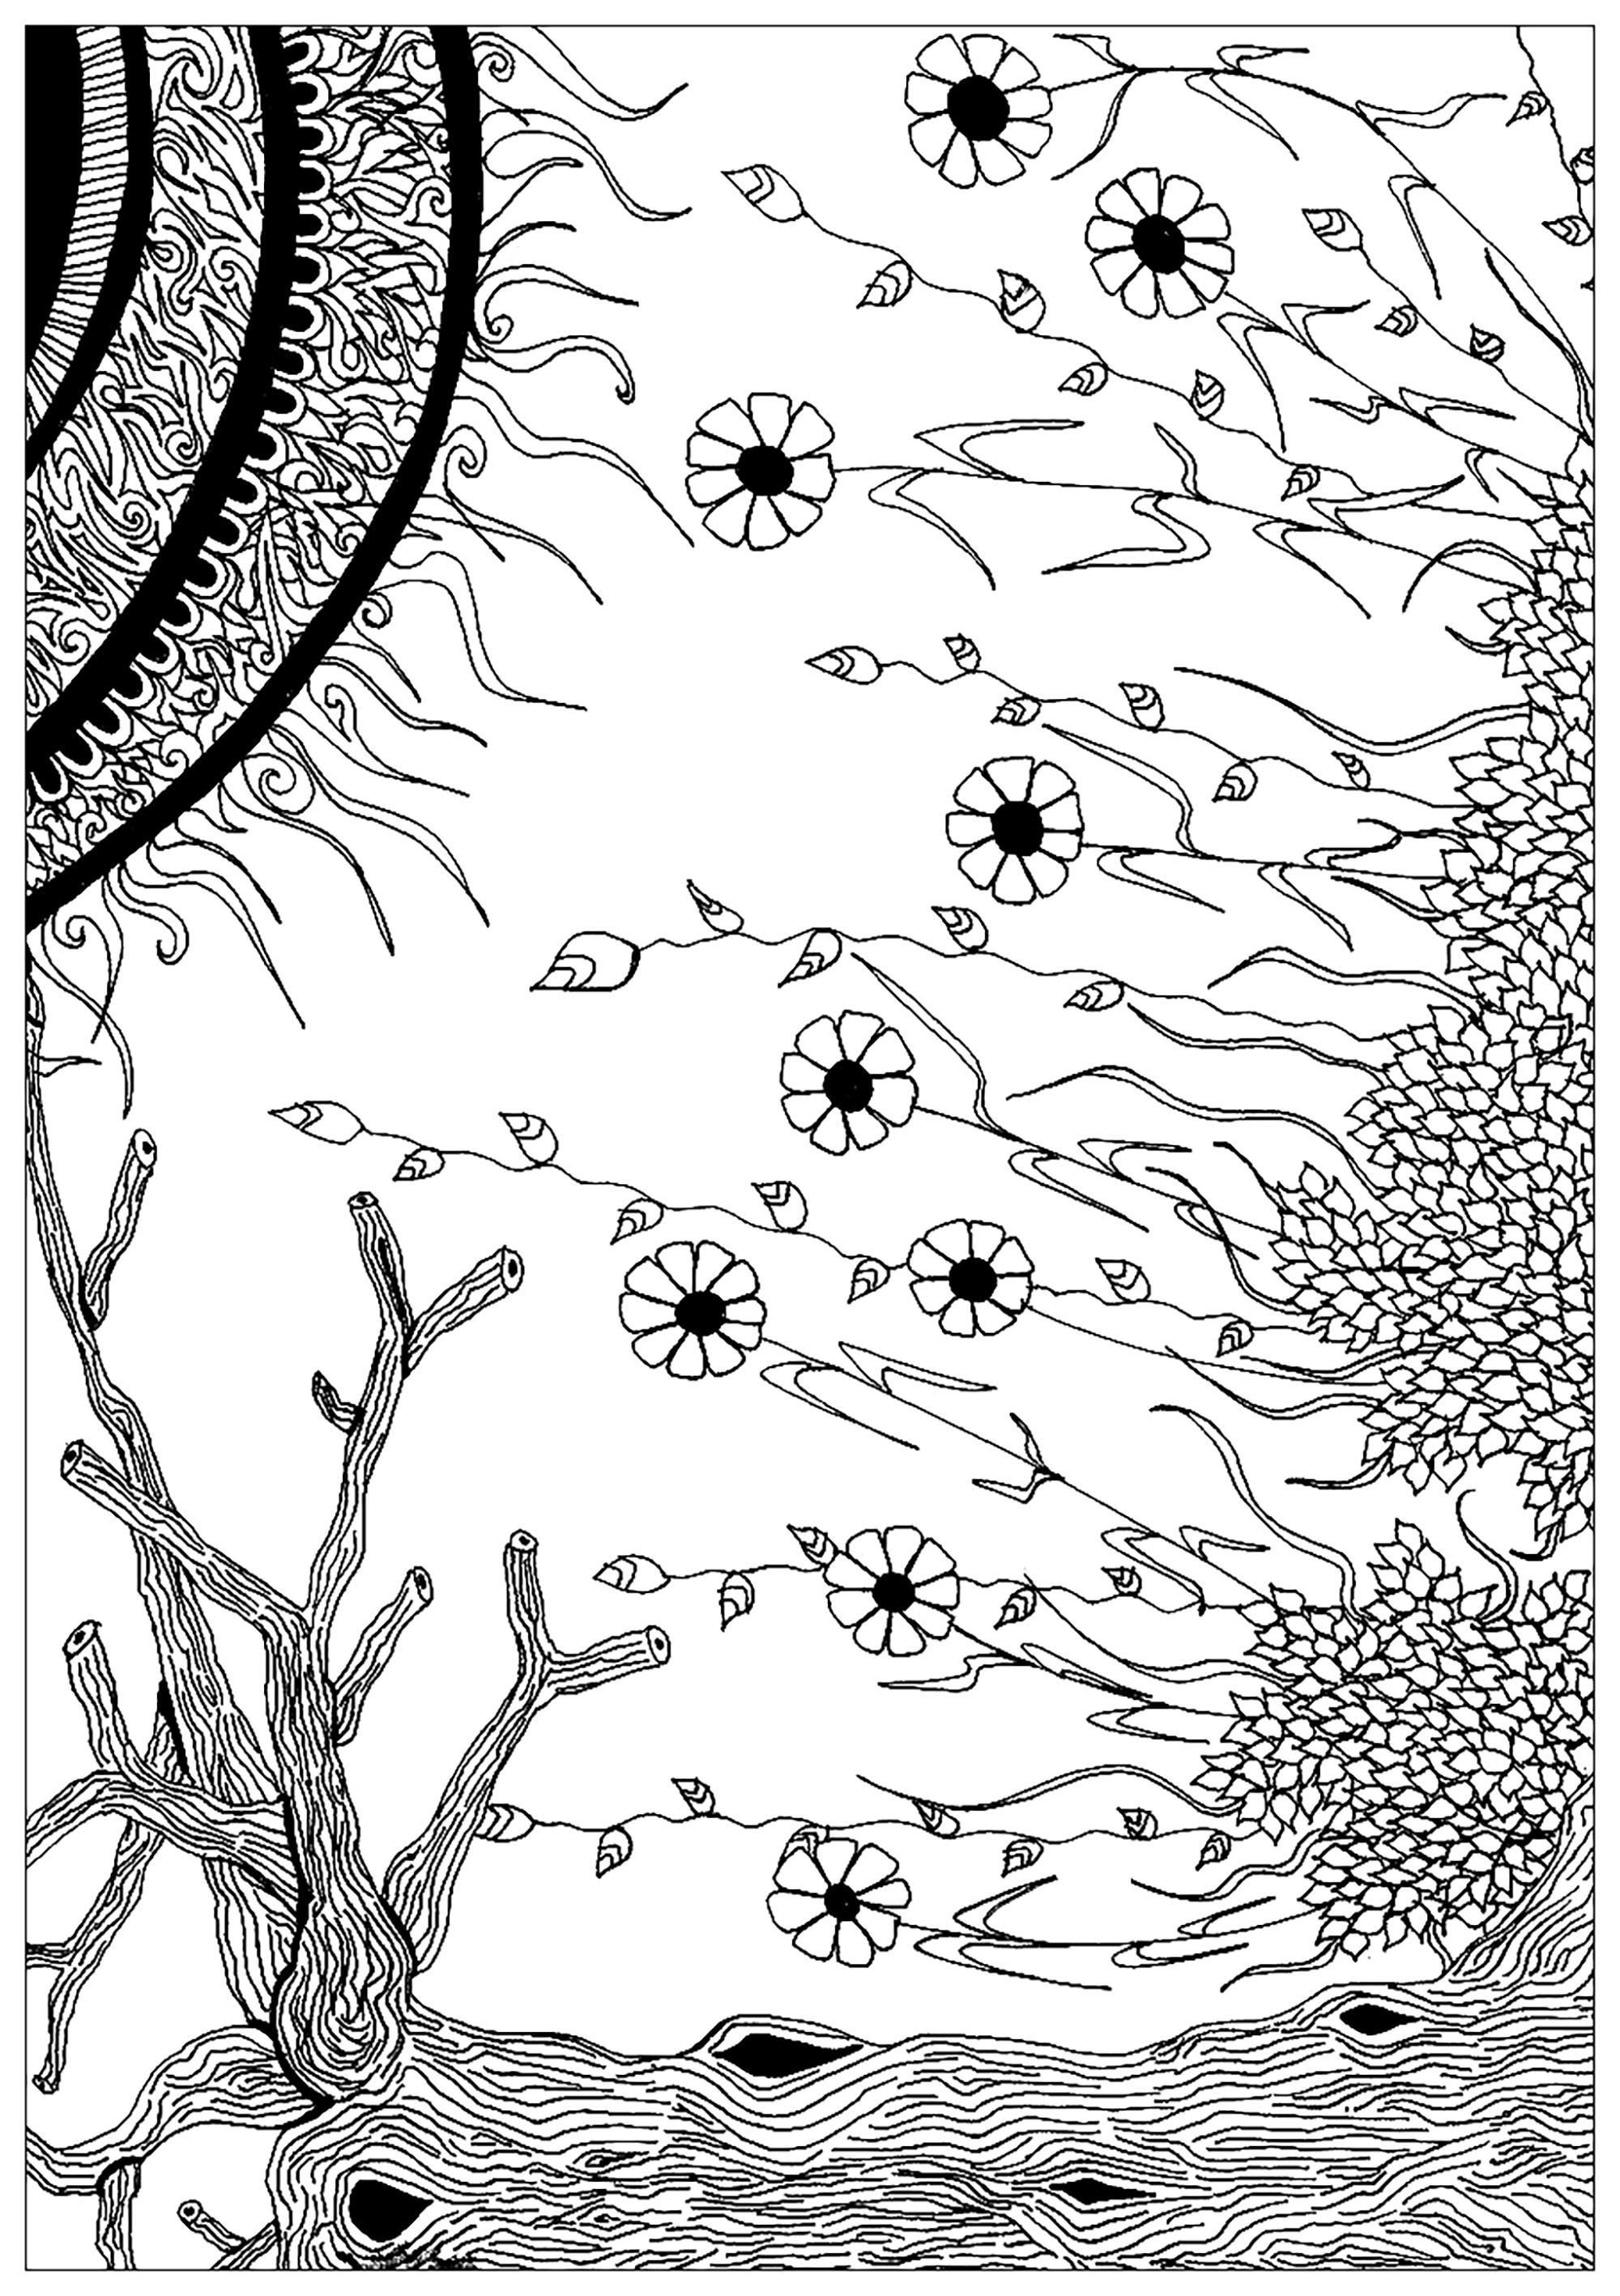 Drawing composed of plant elements, representing the meeting between spermatozoa and an egg